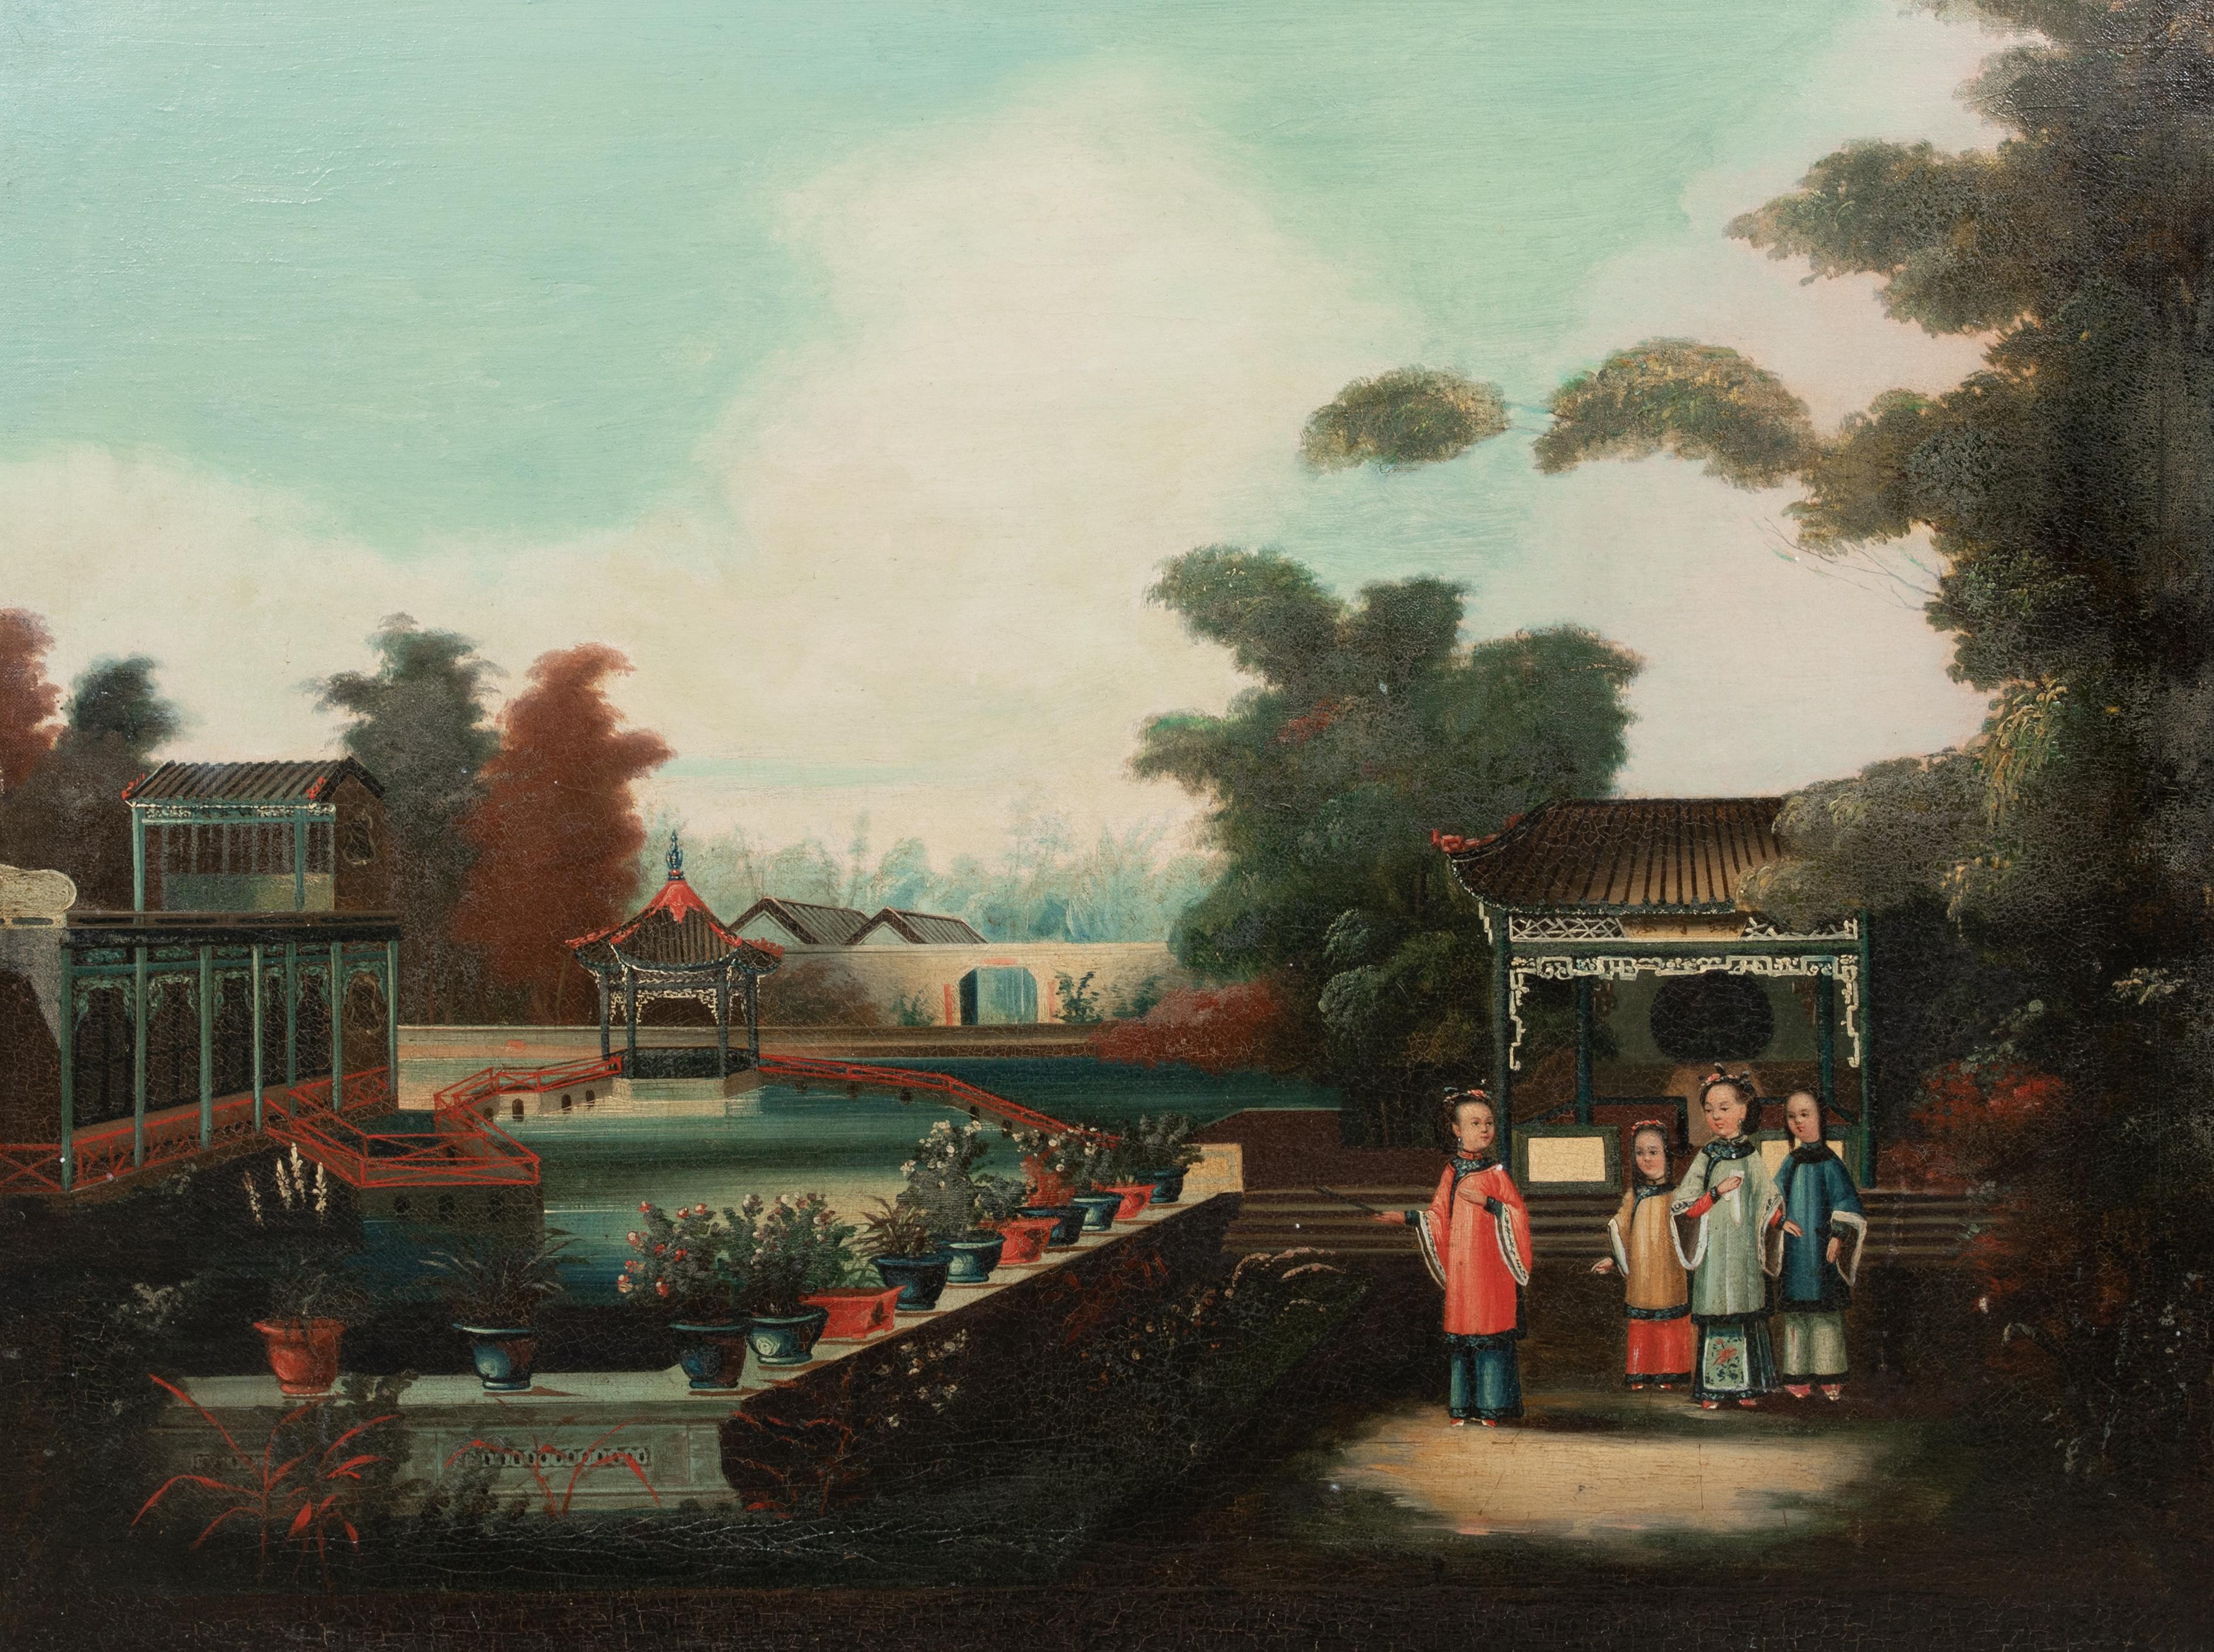 Children In A Garden Landscape, 19th Century

Qing Dynasty Chinese School

Large 19th Century Chinese School garden landscape with children, oil on canvas. Excellent quality and condition circa 1840 garden scene with a woman and children in an